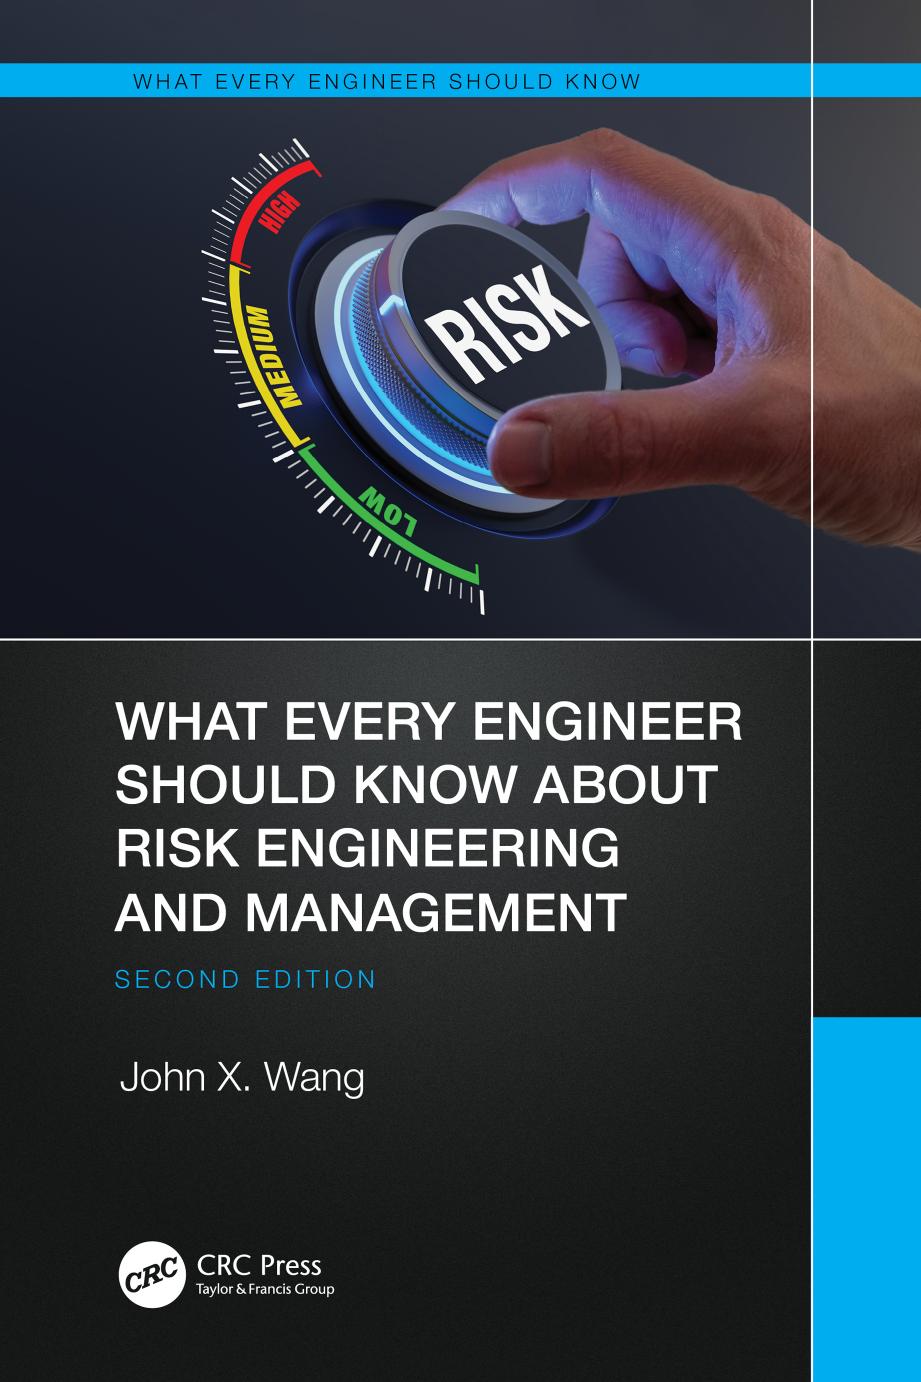 What Every Engineer Should Know About Risk Engineering and Management by John X. Wang